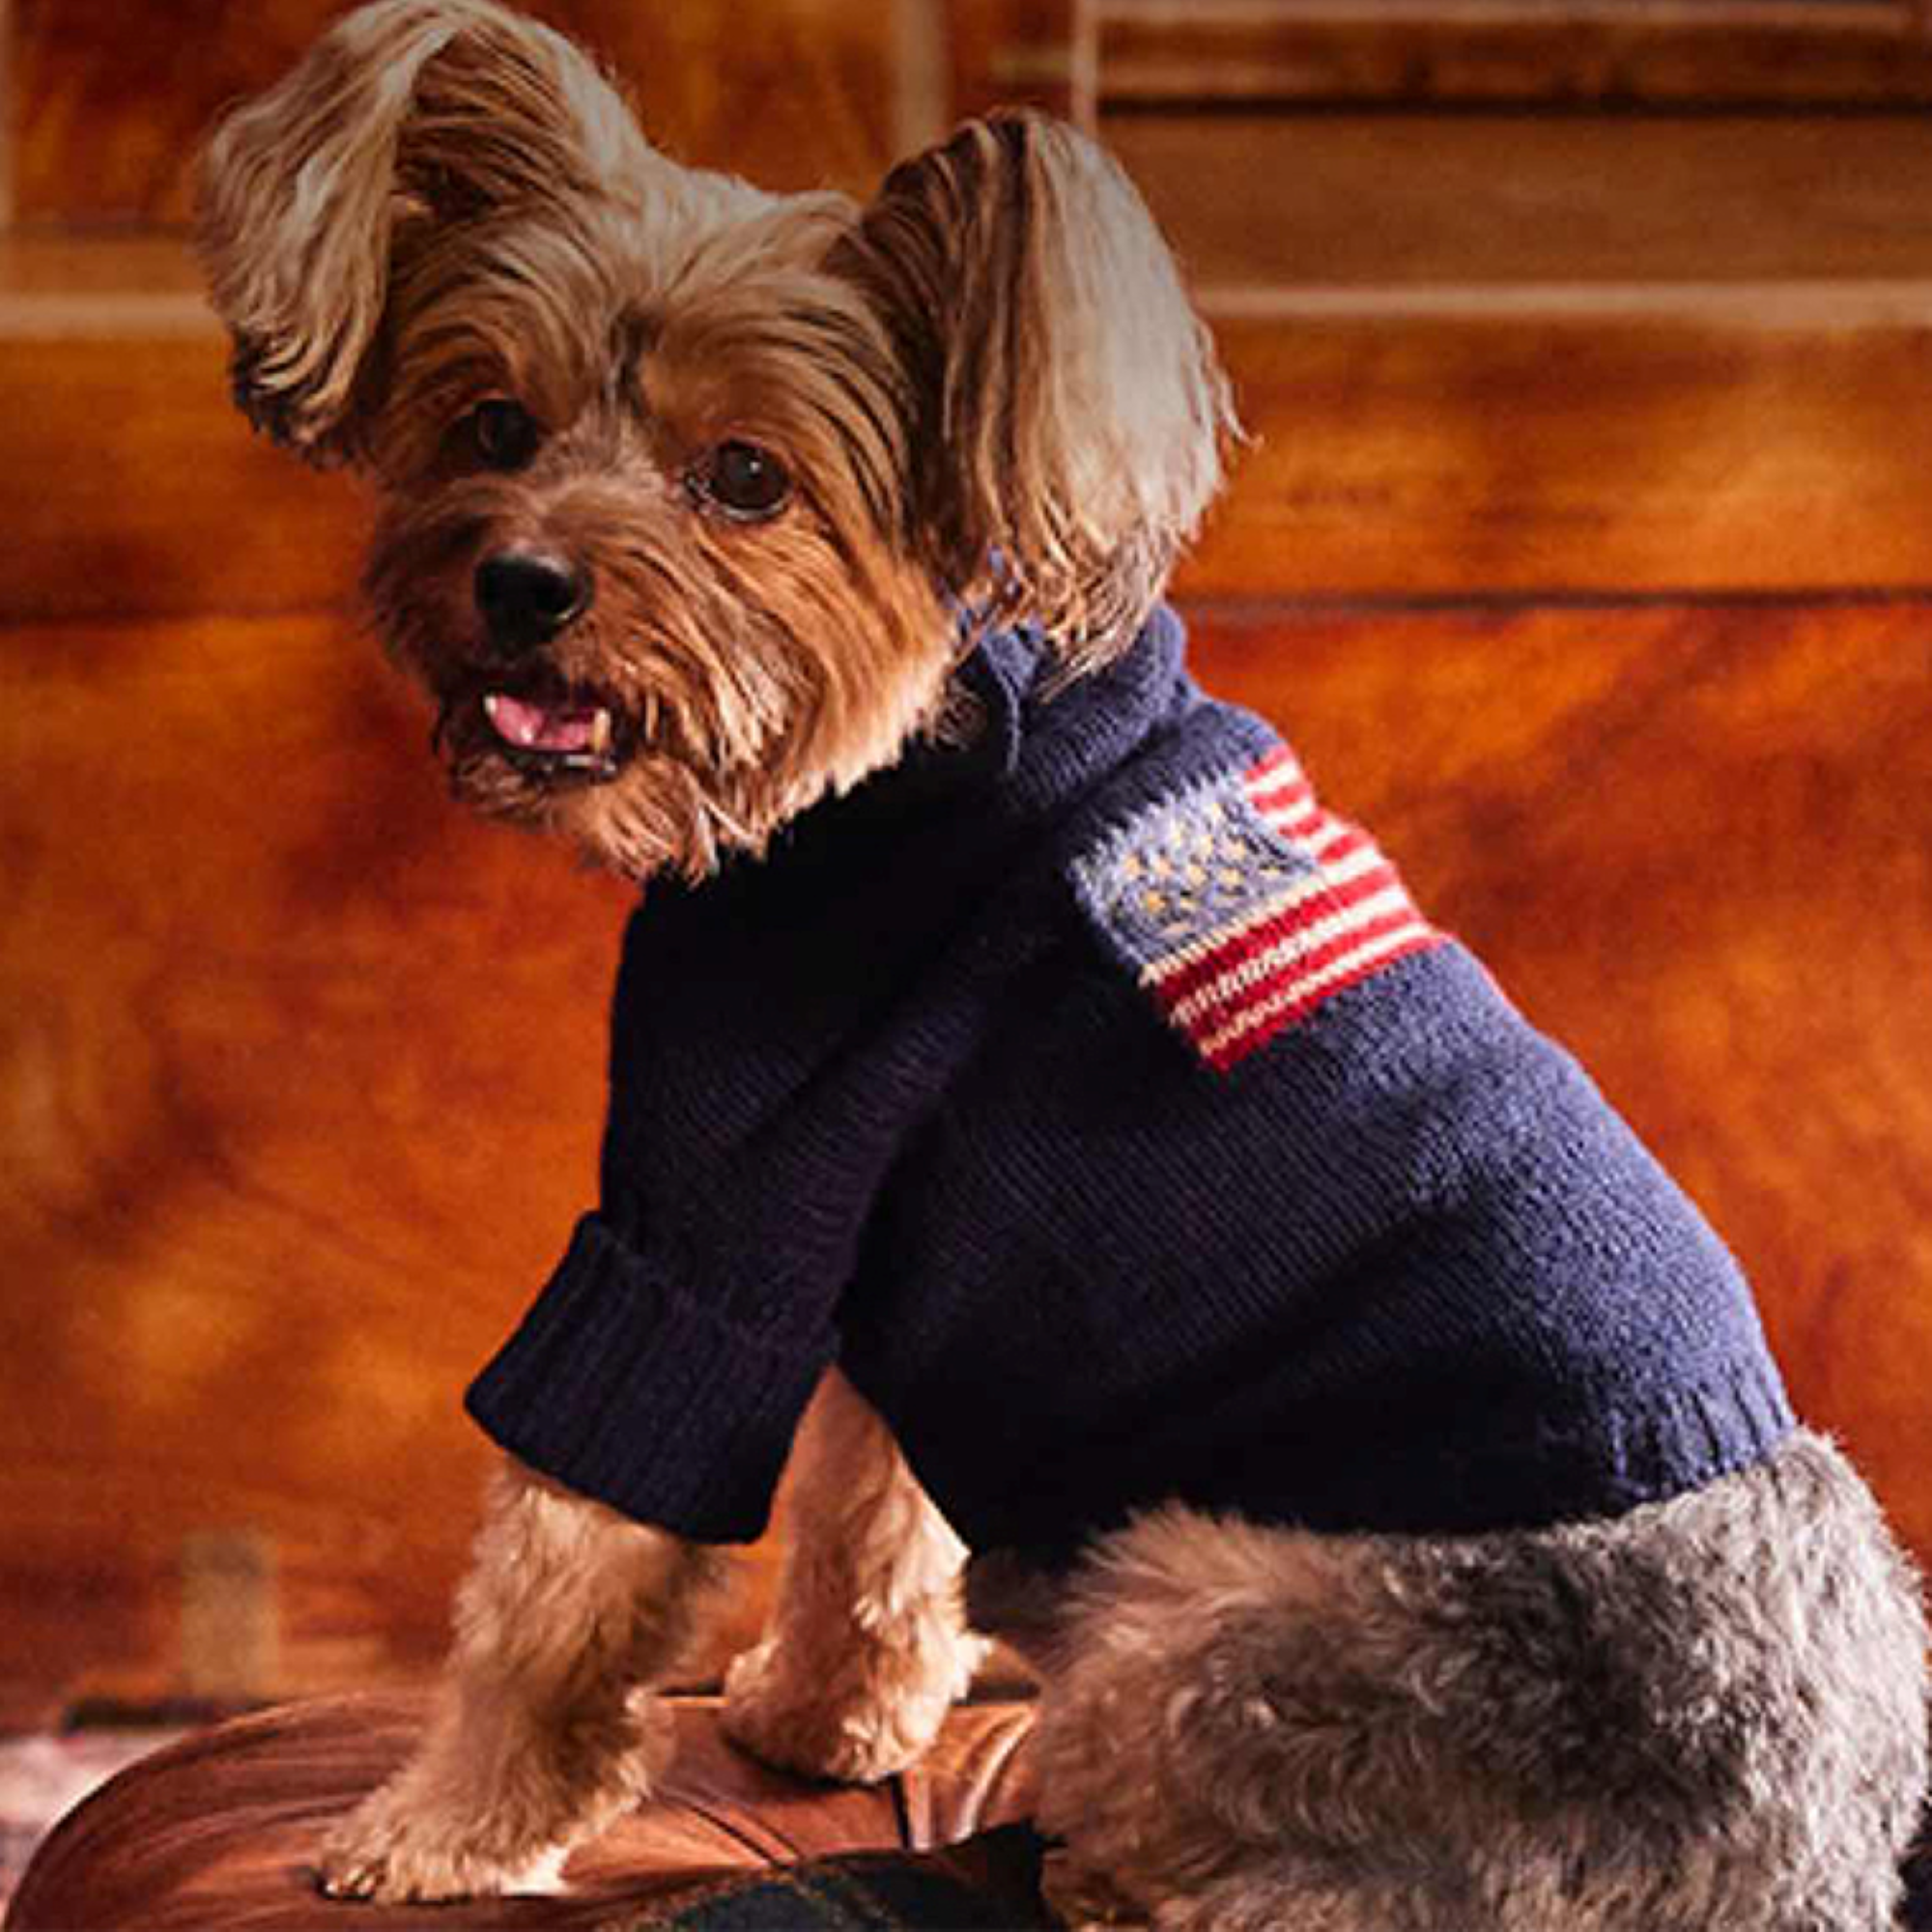 Kanine Group Launches Dog Apparel, Accessories and Home Products With Boss Dog  Accessories, Warner Brothers' DC League of Super-Pets and Kanine Brands